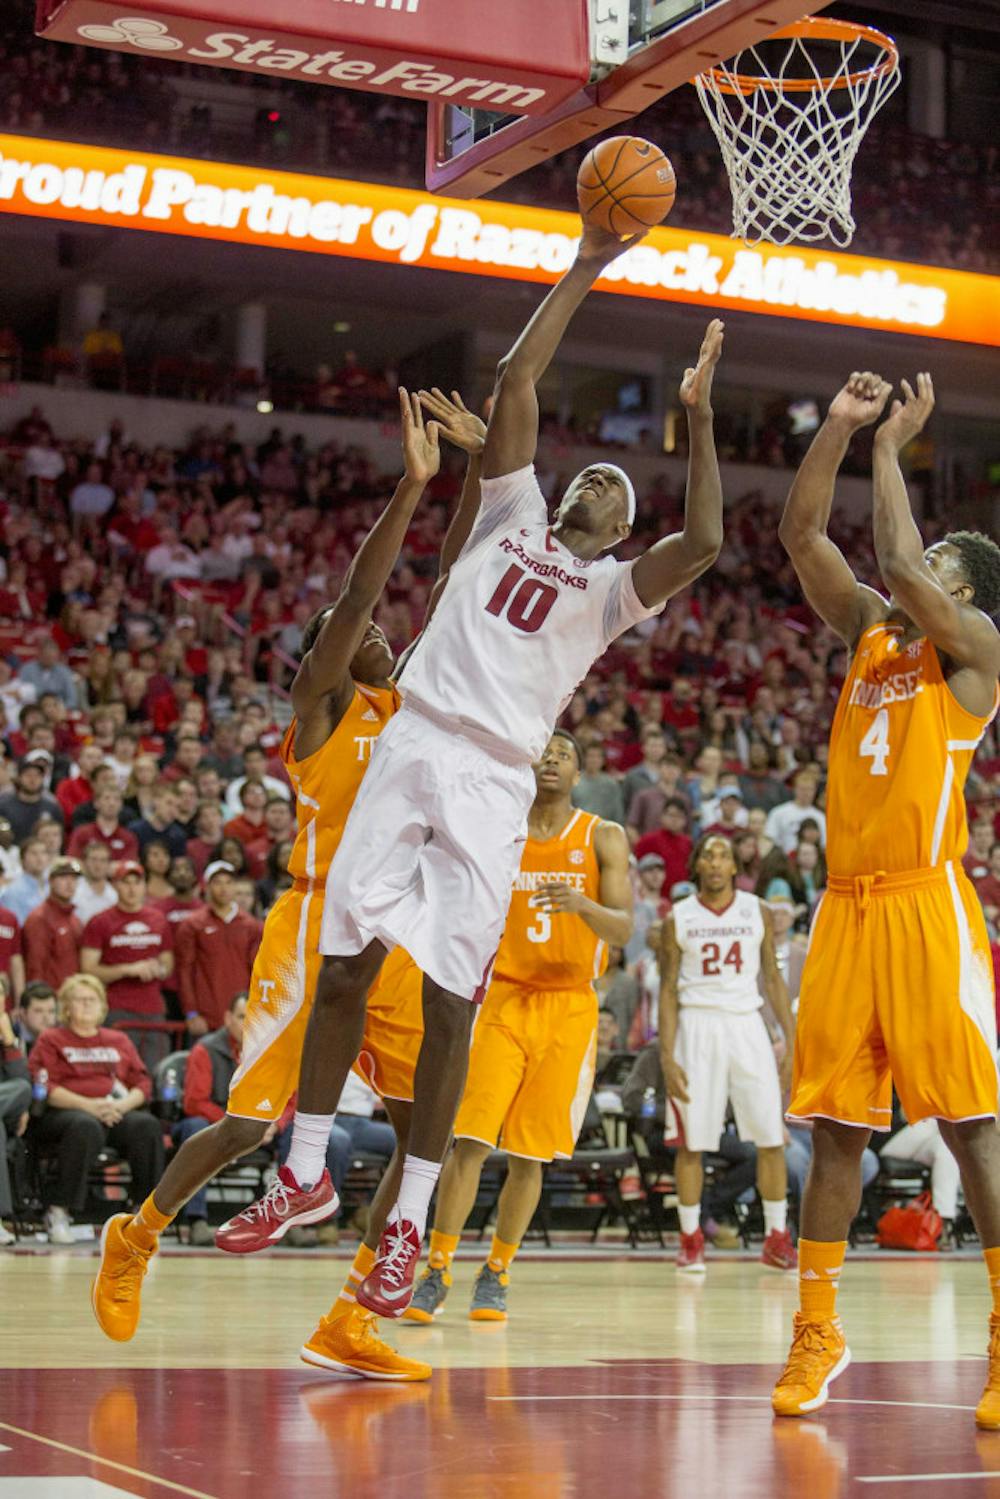 <p>Arkansas forward Bobby Portis, center, shoots a layup as Tennessee forward Armani Moore, right, guards during the second half of an NCAA college basketball game on Tuesday, Jan. 27, 2015, in Fayetteville, Ark. Arkansas defeated Tennessee 69-64.</p>